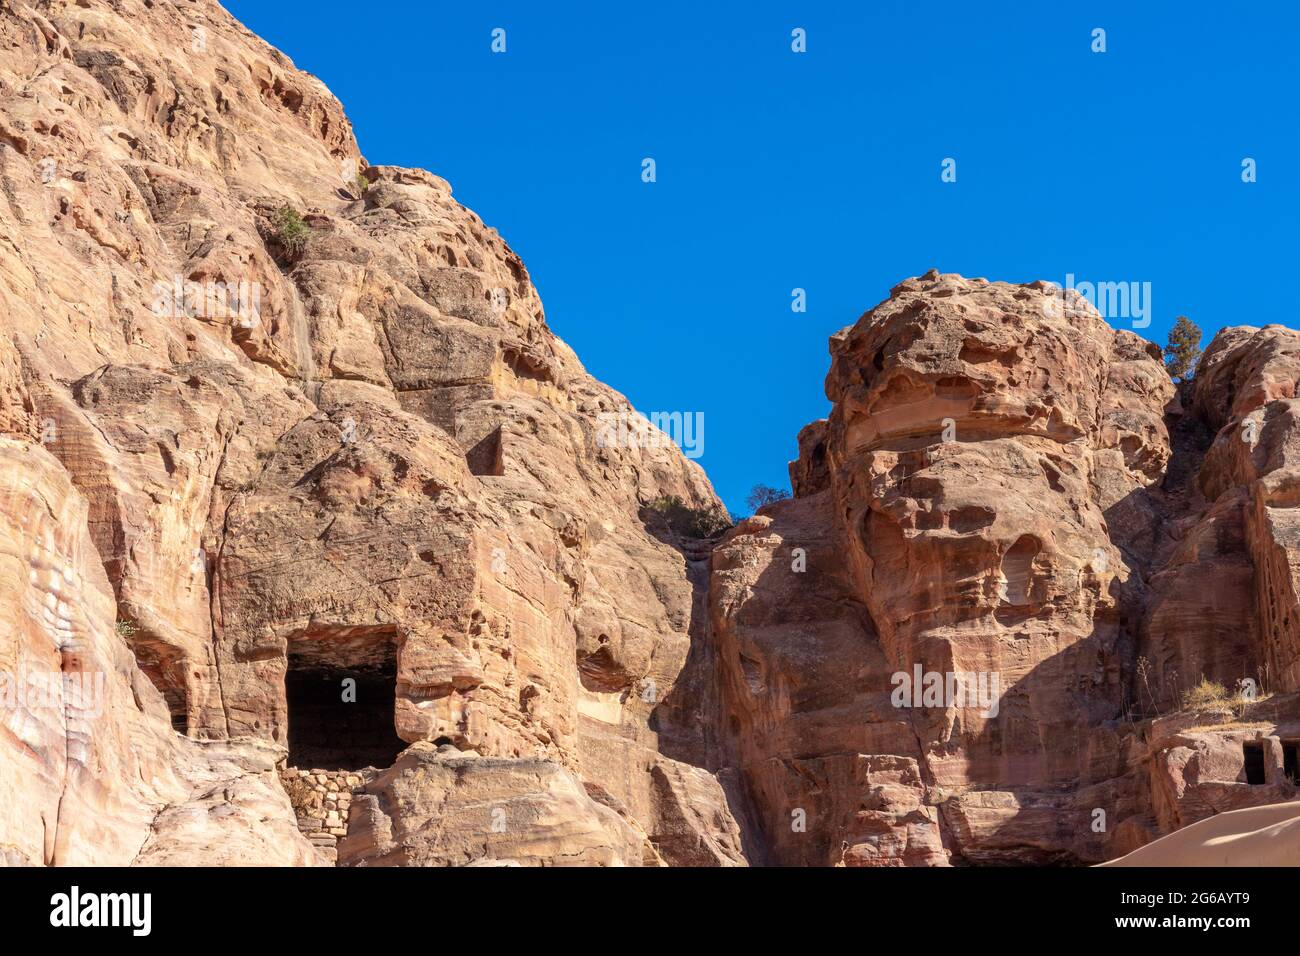 Tombs carved in sandstone Jabal-al-Khubtha, AD 70, archaeological site of Petra, Jordan Stock Photo